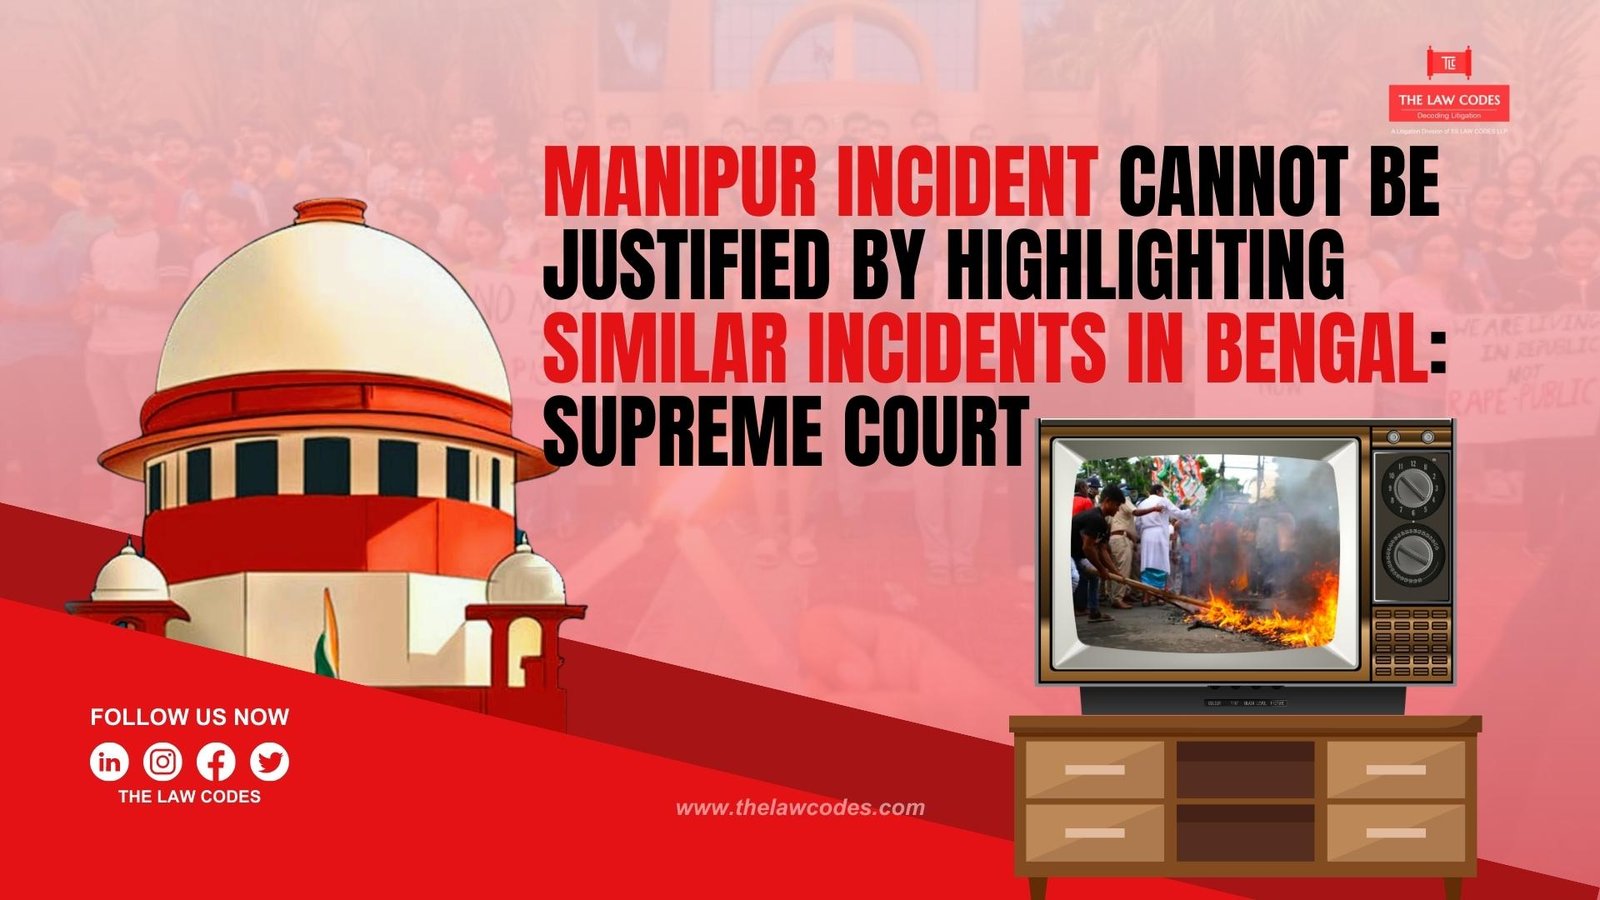 Manipur incident cannot be justified by highlighting similar incidents in Bengal Supreme Court